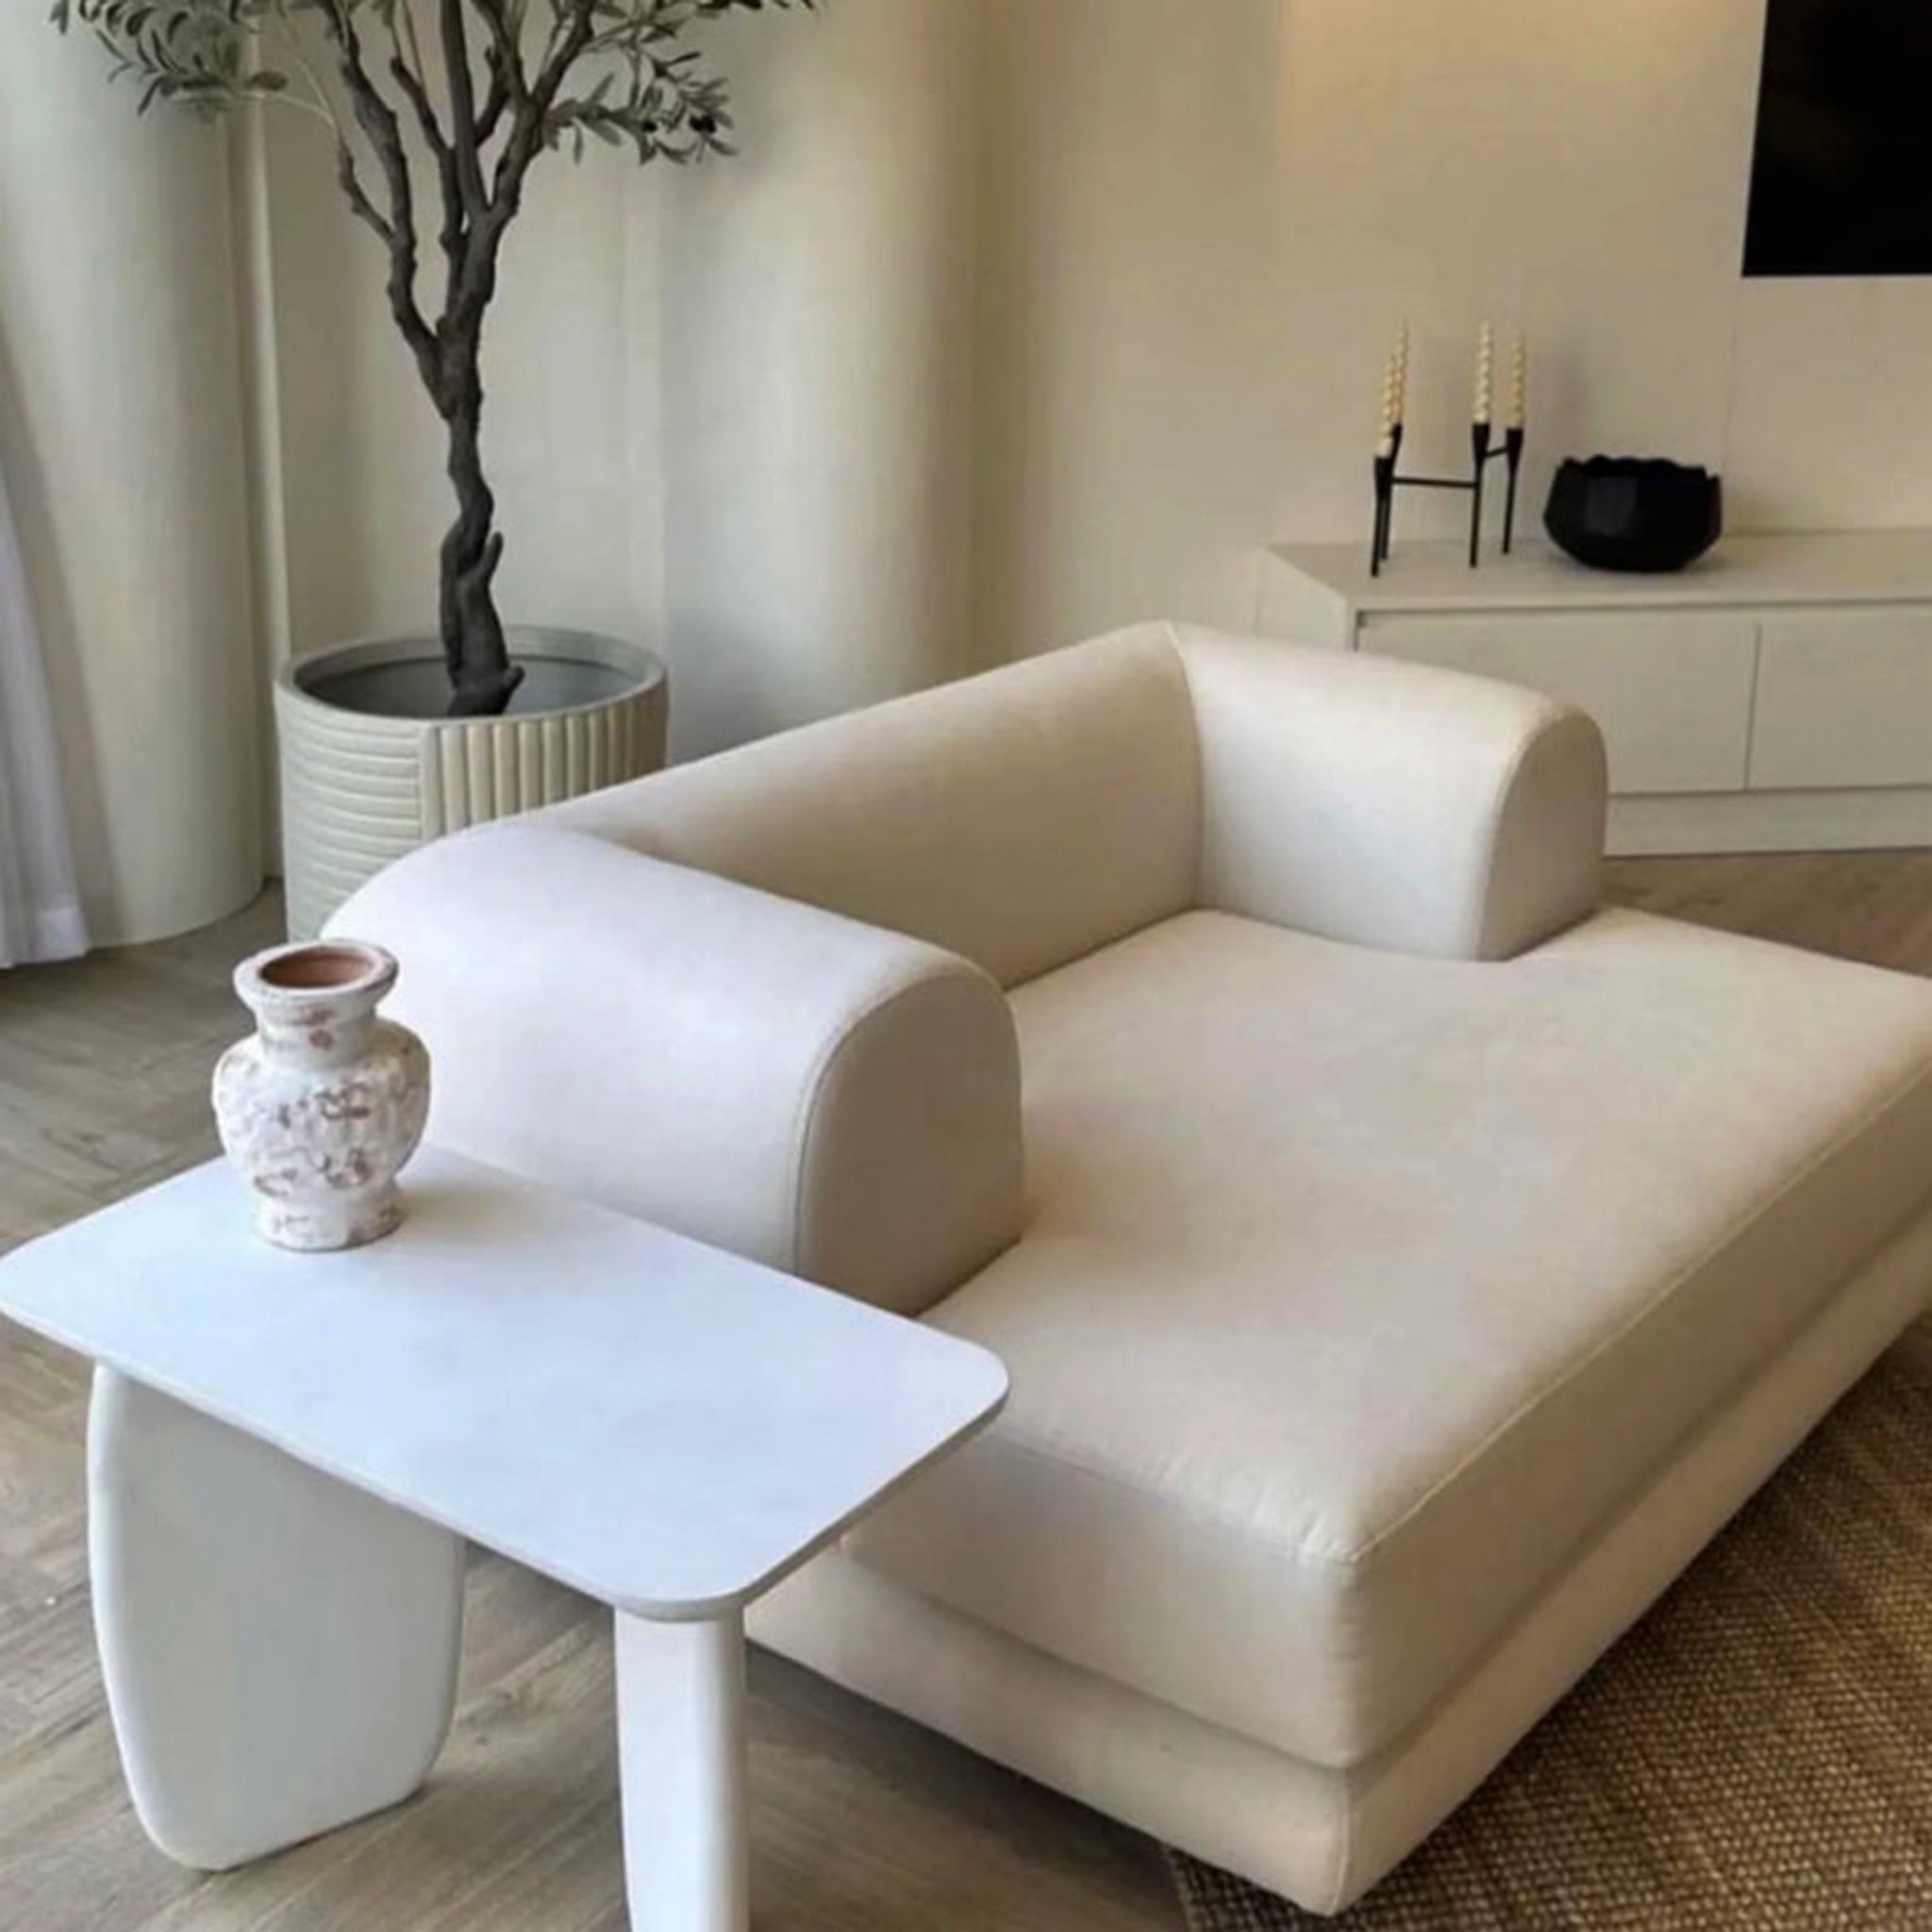 "Modern living room featuring The Lewis Low Lounger Accent Chair with beige upholstery, accompanied by a white side table holding a decorative vase, and complemented by a potted plant and minimalist decor."